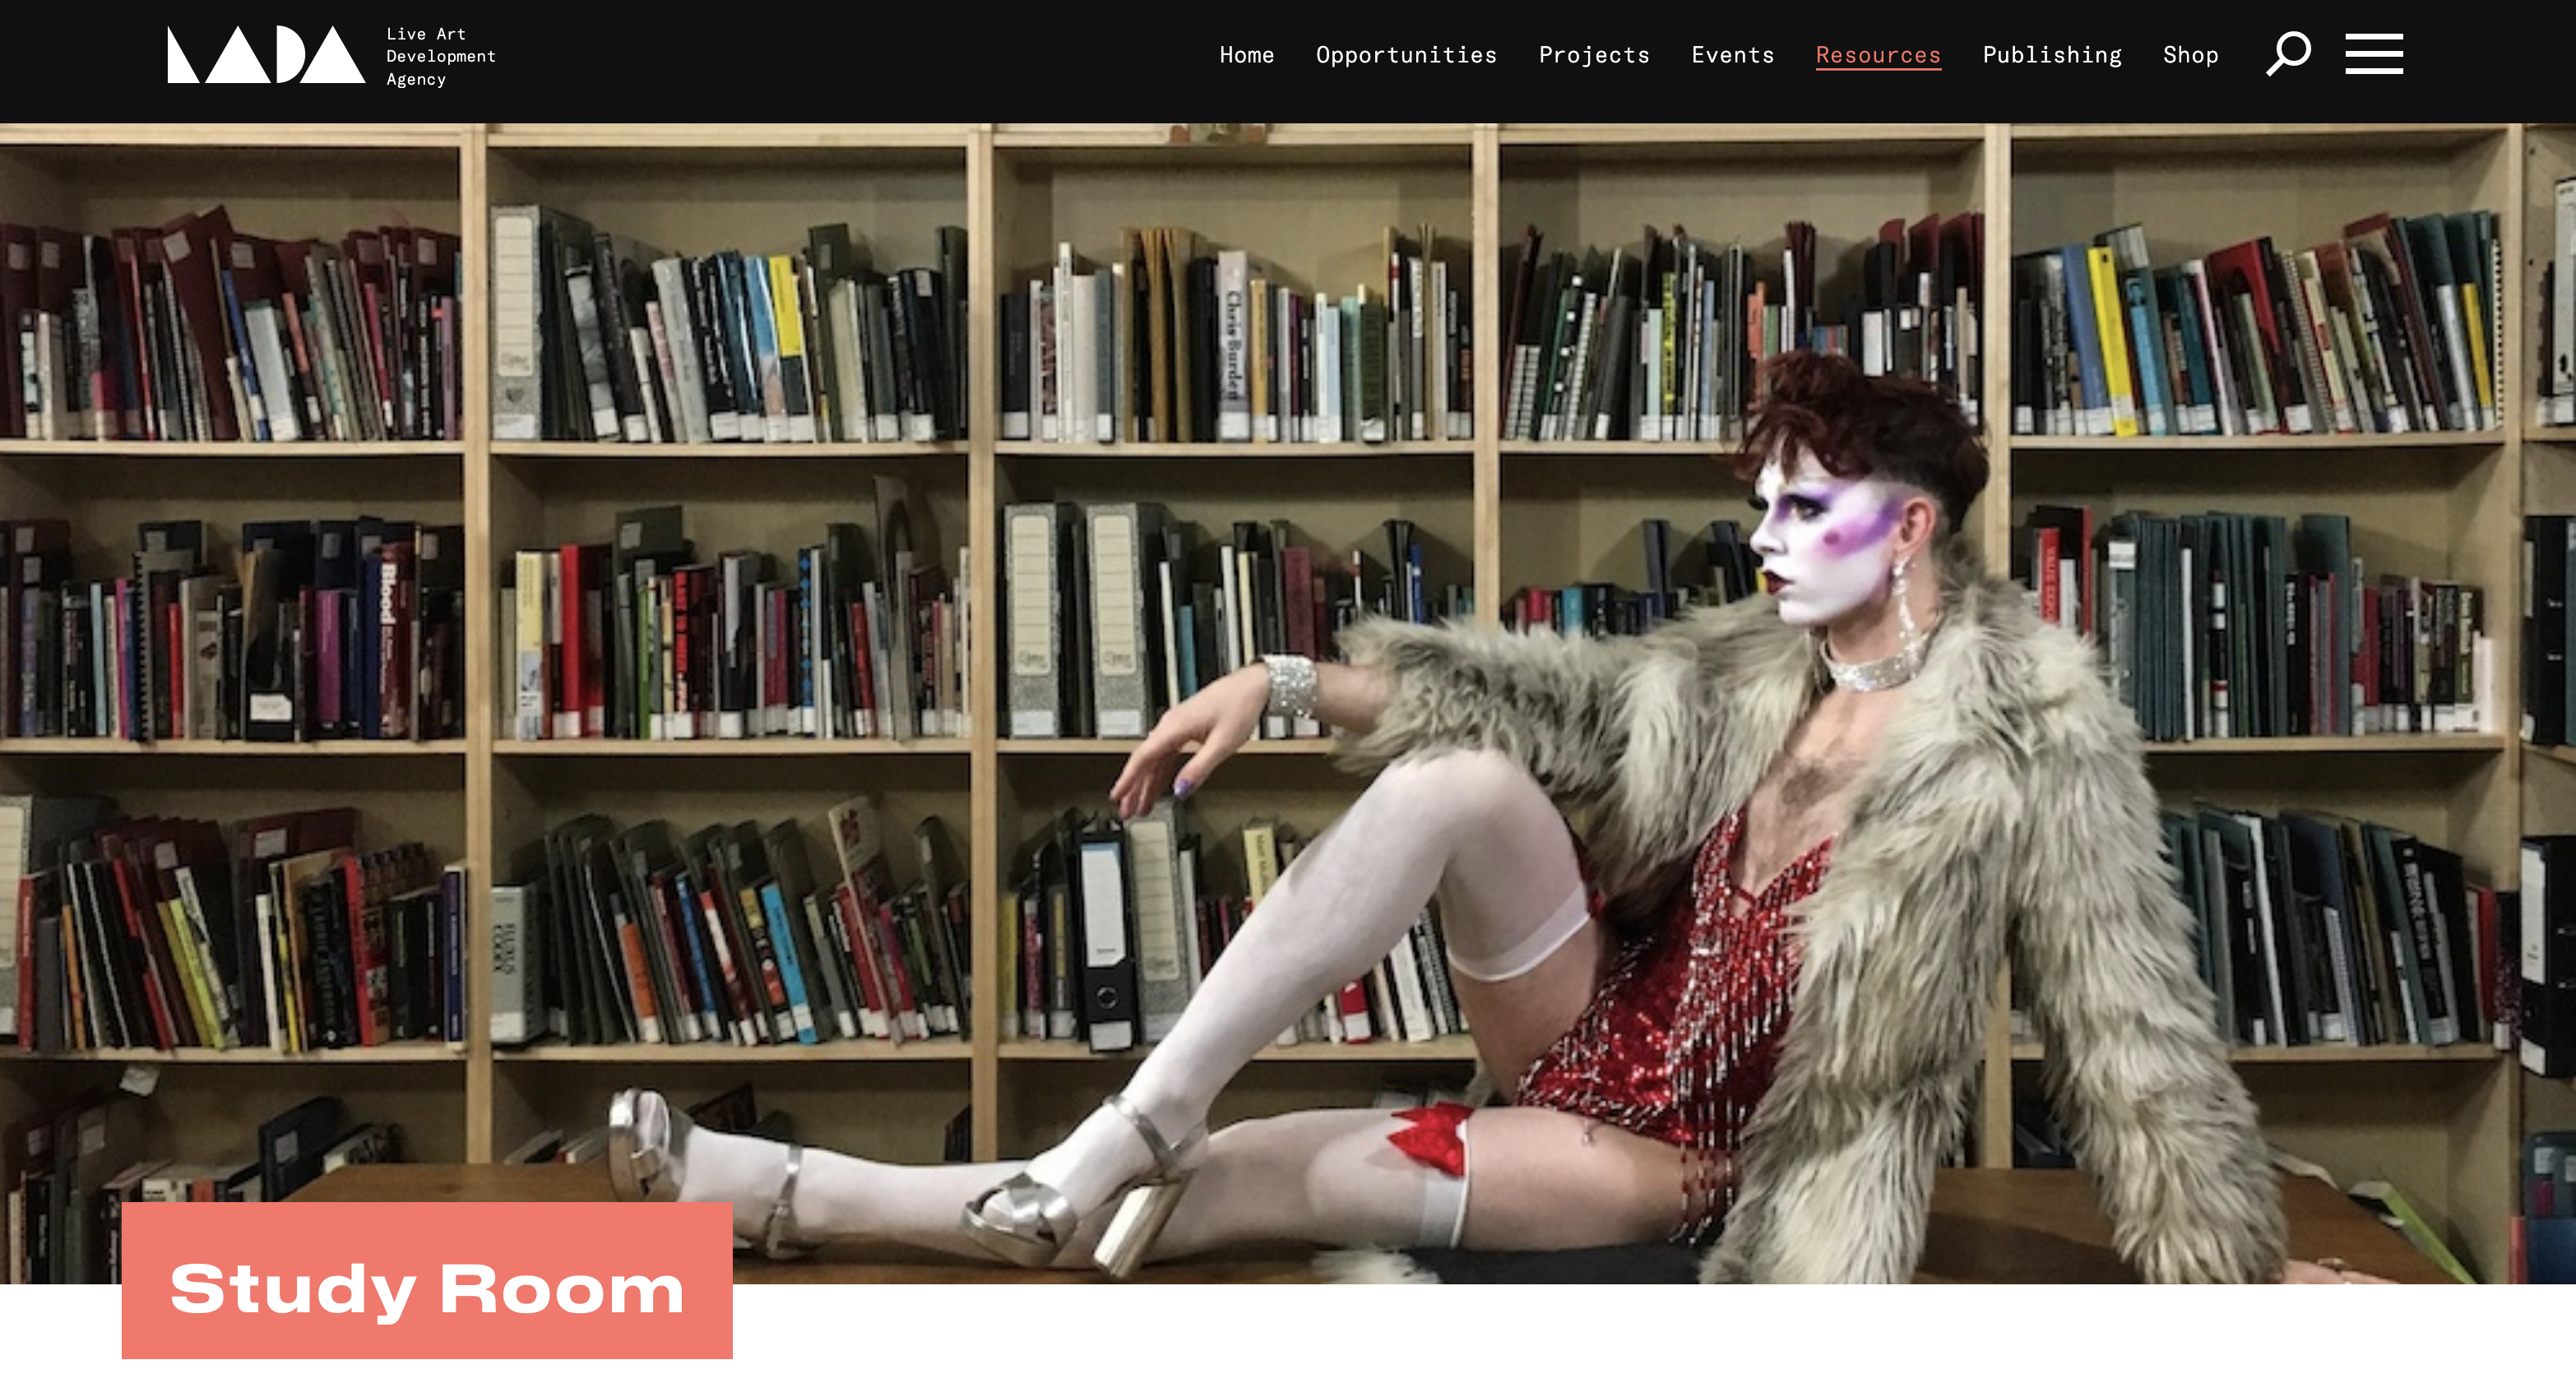 Snapshot of a webpage - LADA, The Study Room